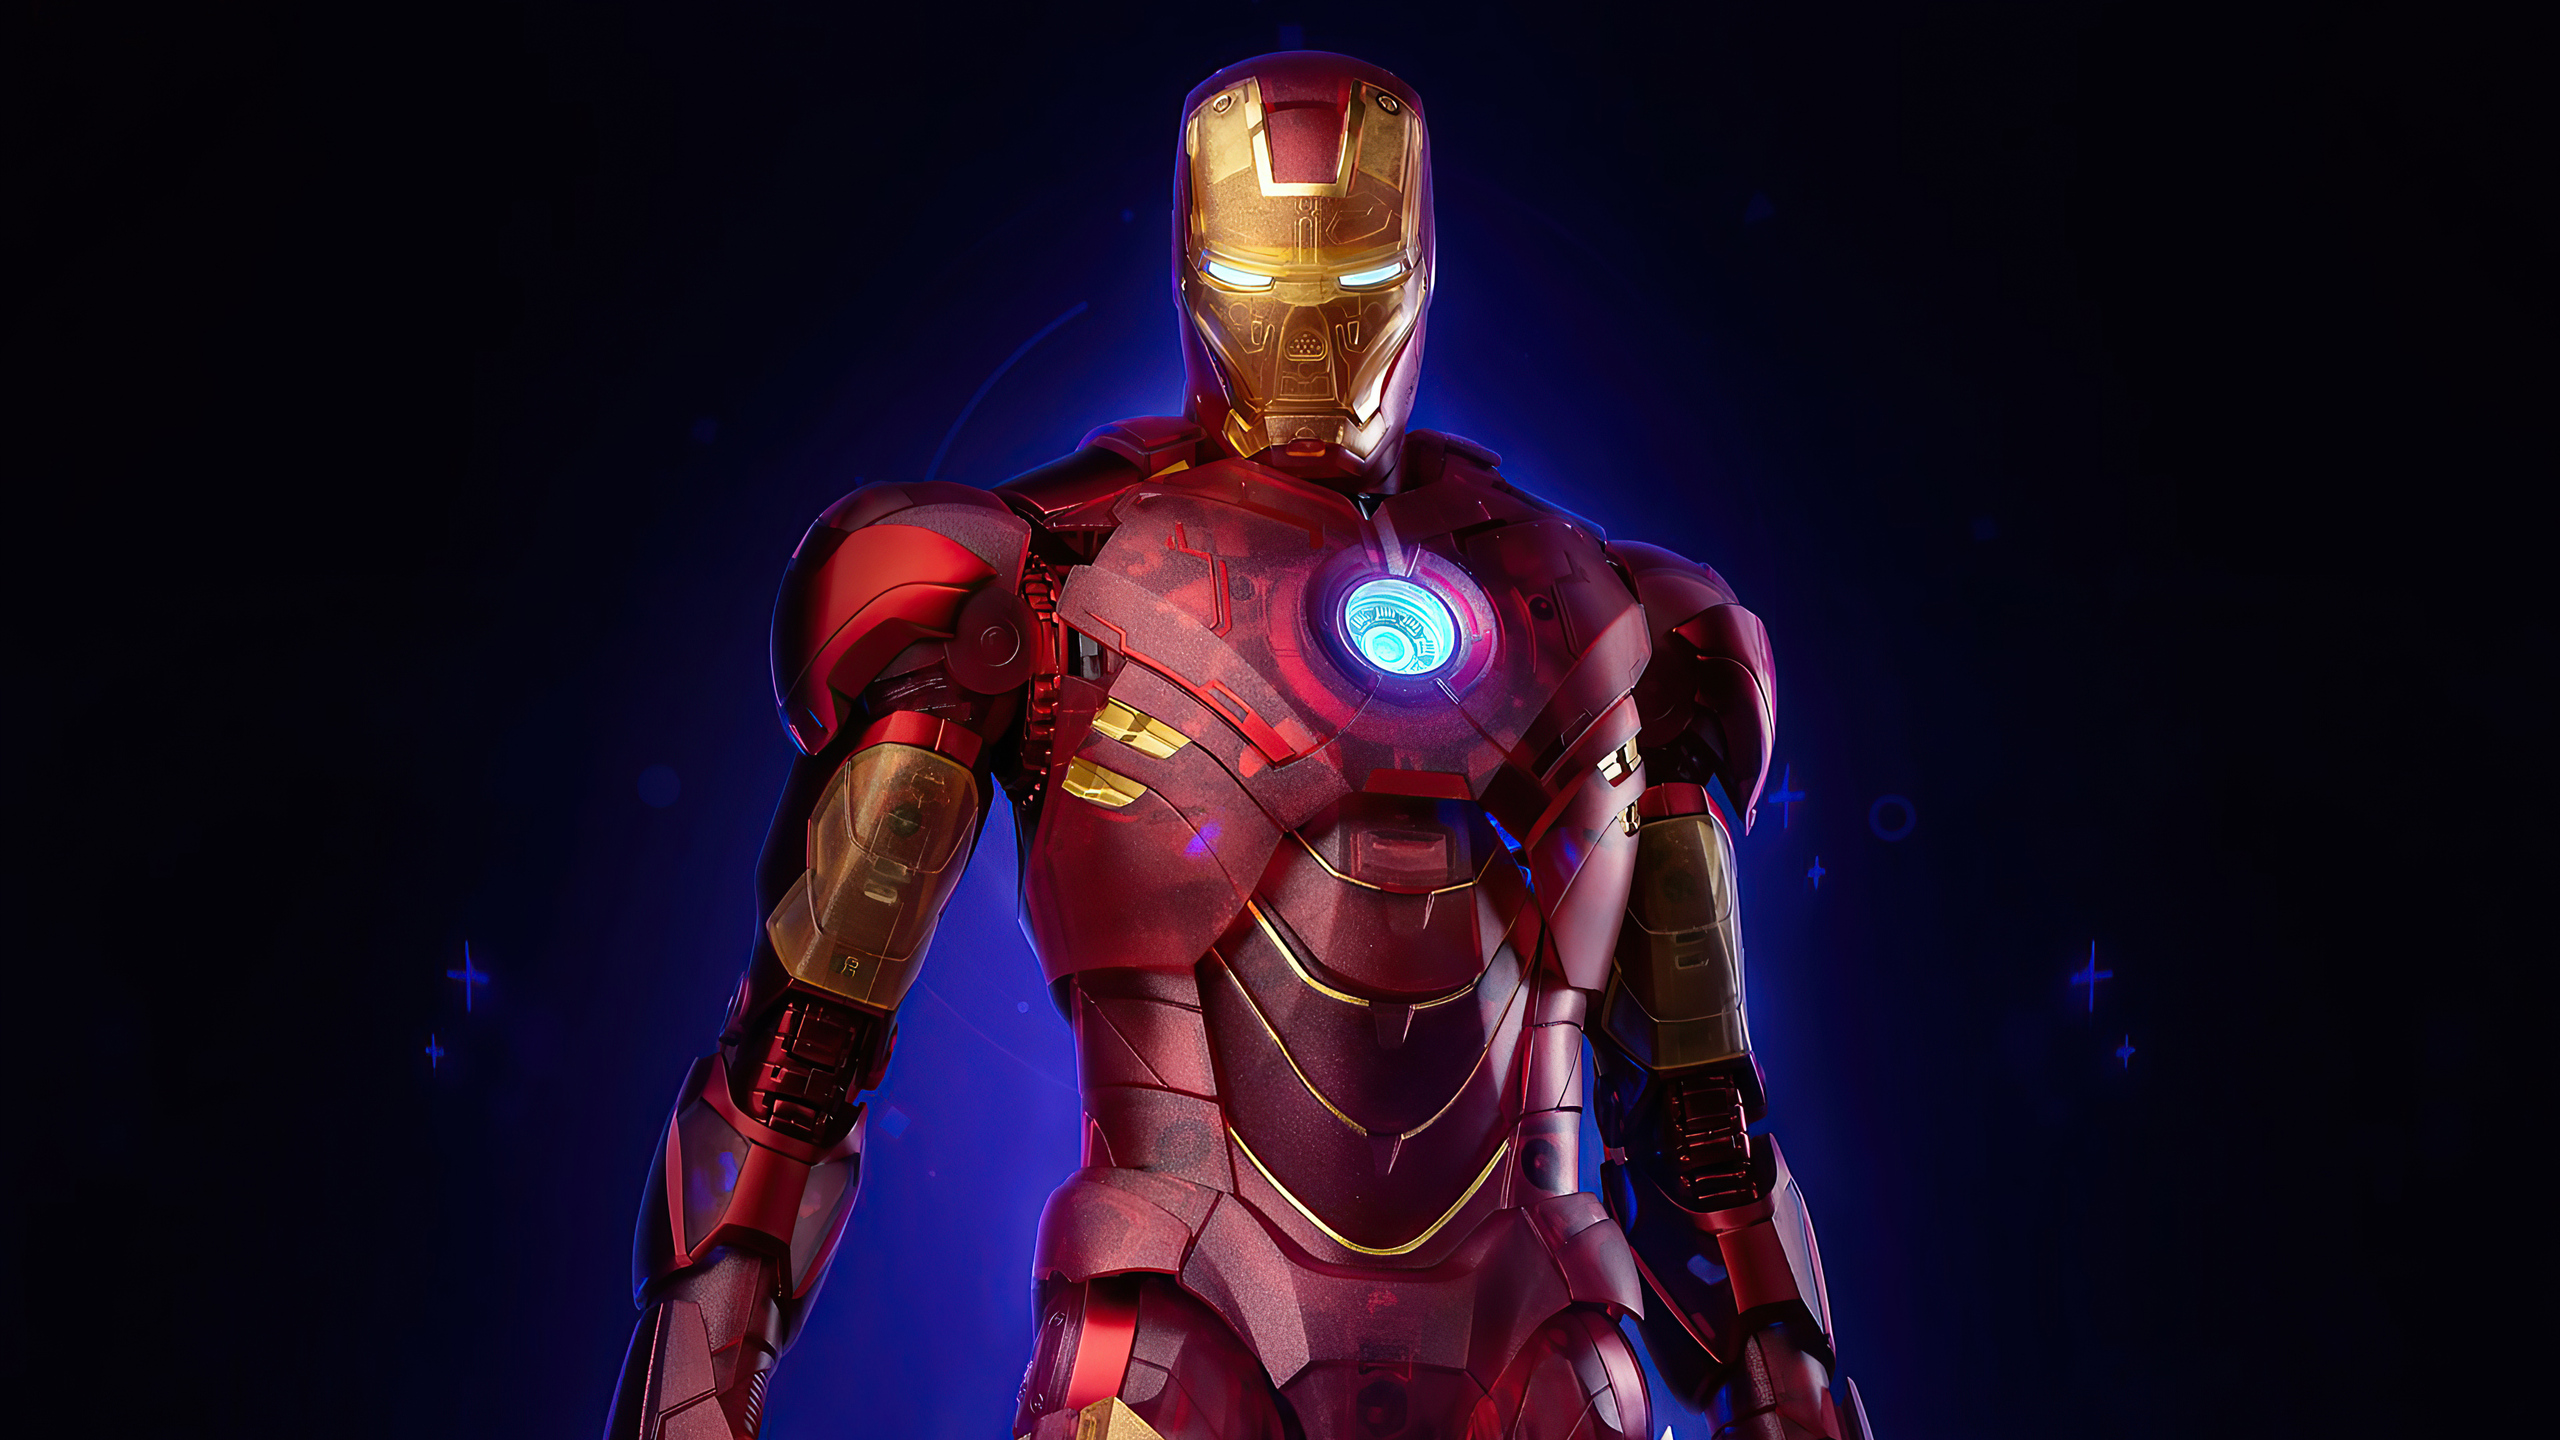 2560x1440 iron man 2020 armour 1440p resolution hd 4k wallpapers.